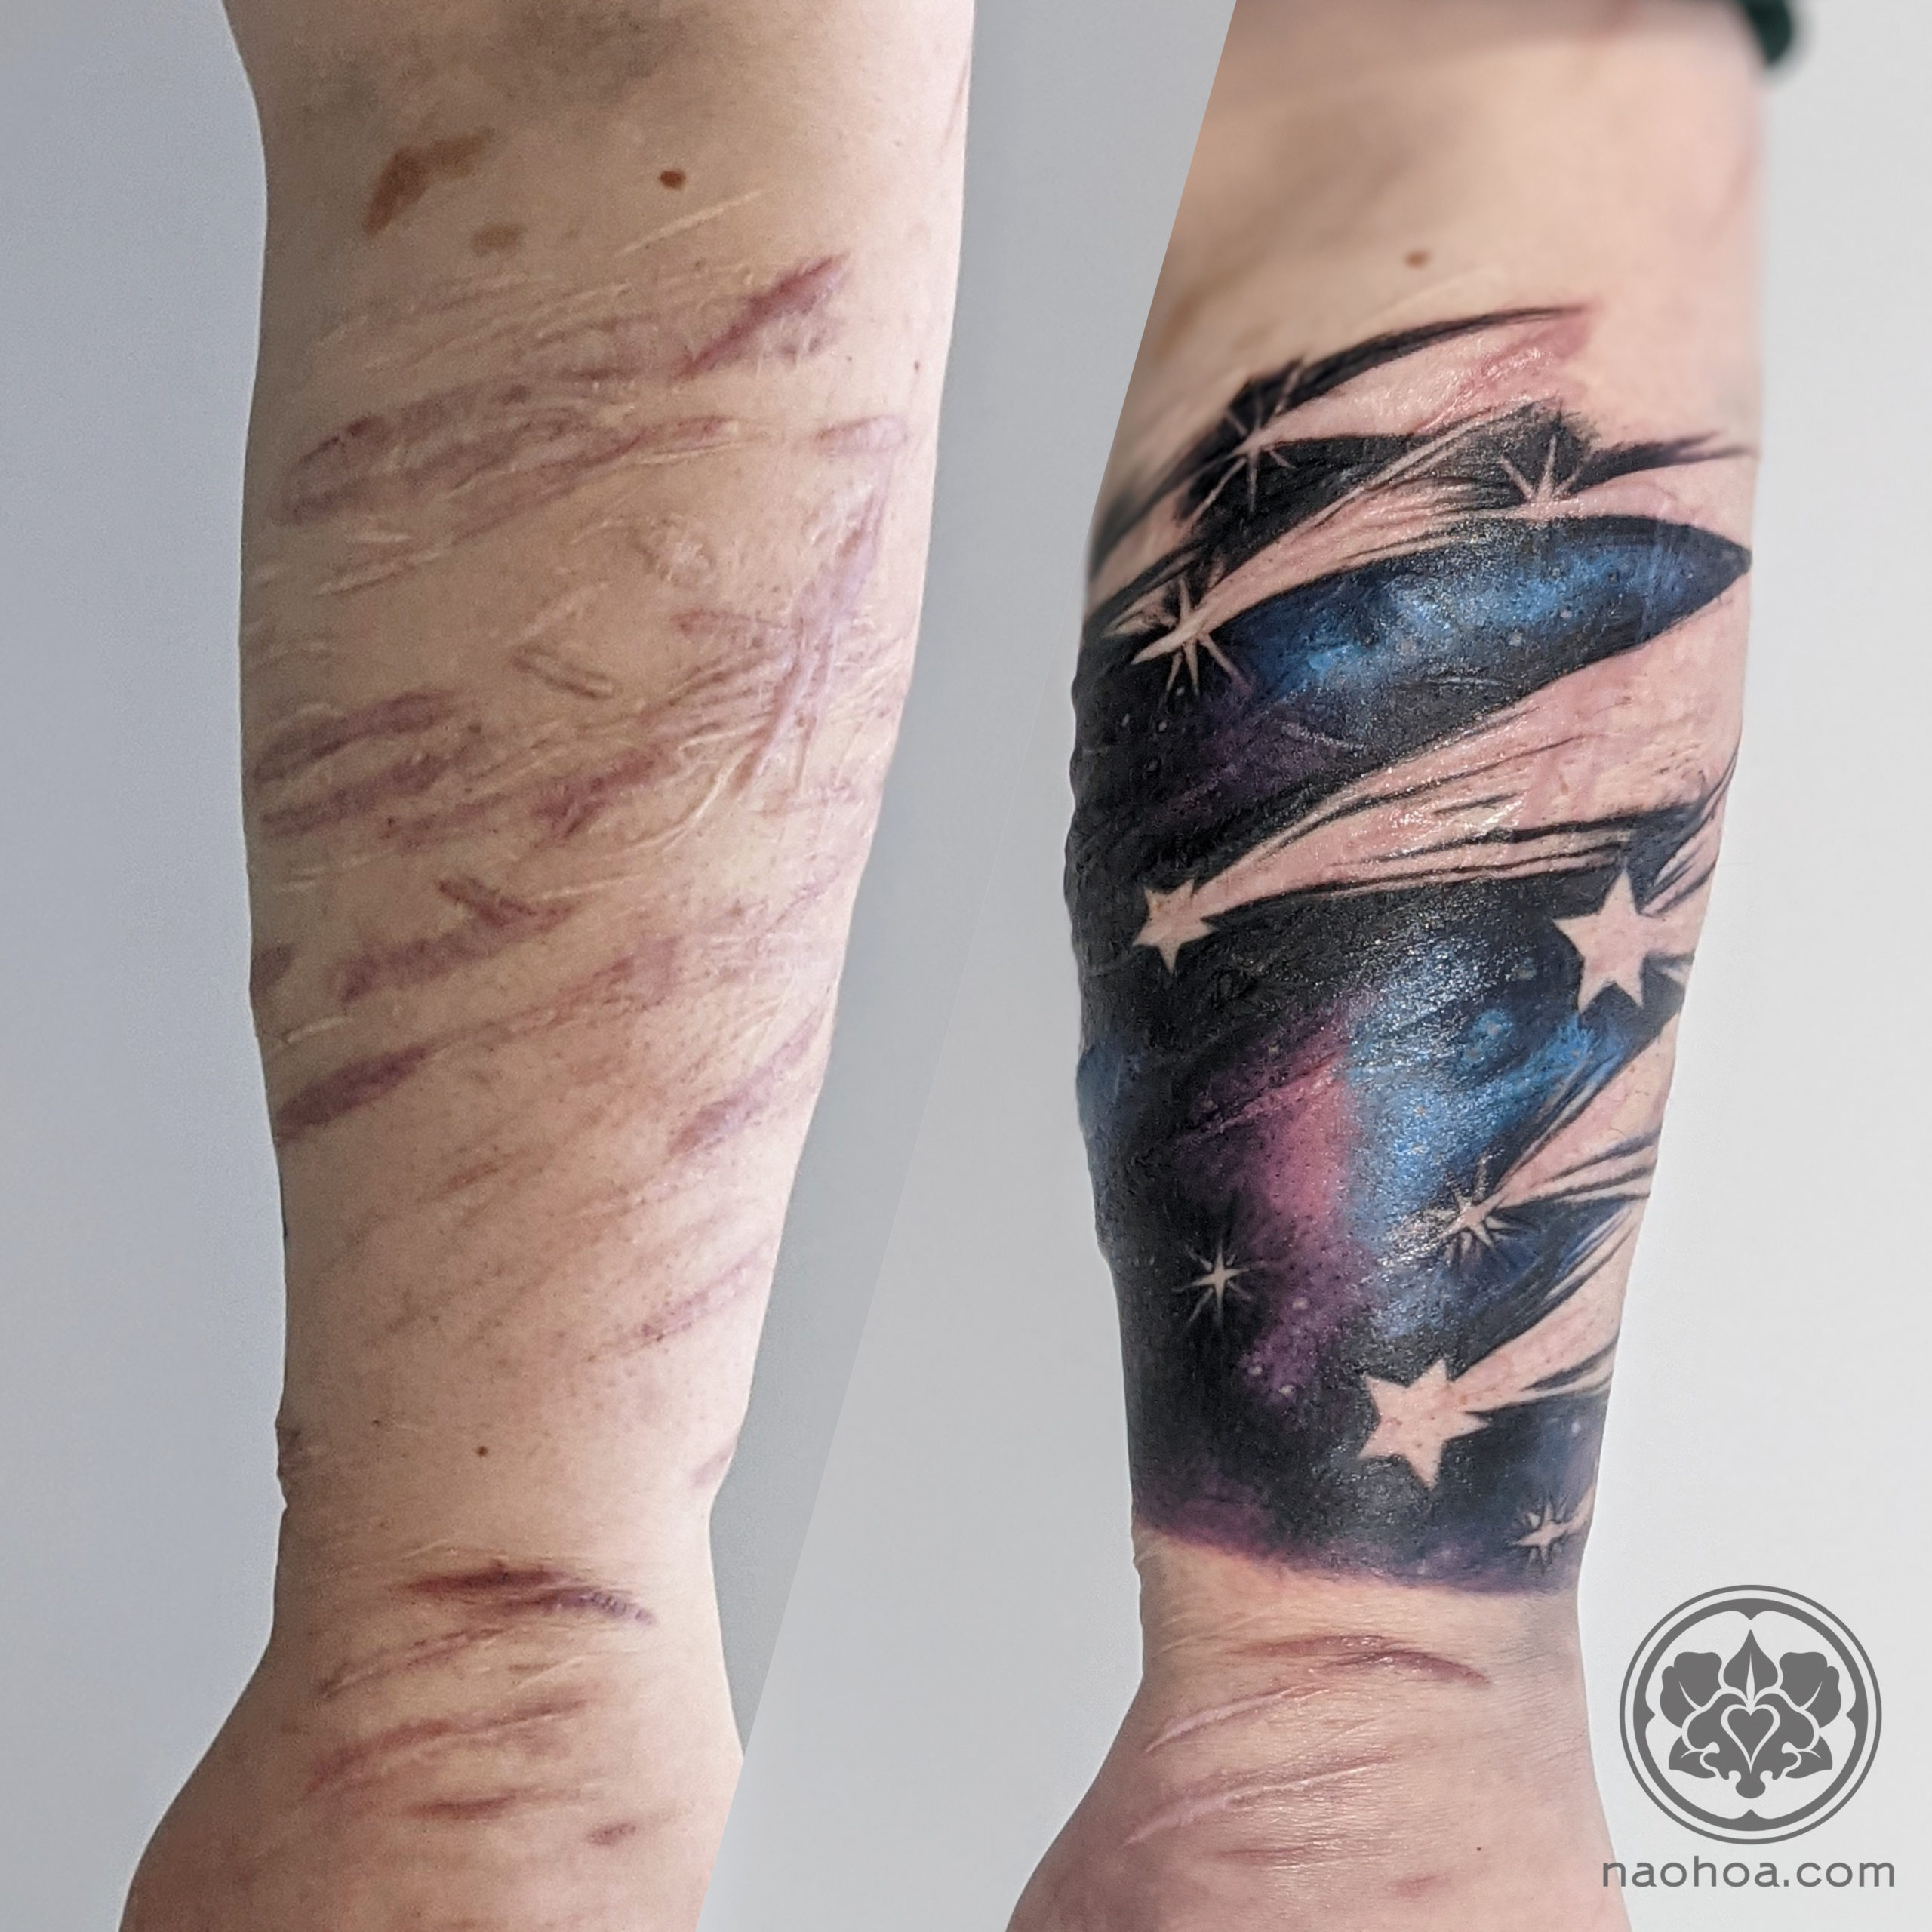 50 Times People Asked Tattoo Artists To Cover Up Their Scars And Birthmarks  And Couldnt Be Happier With The Result  Bored Panda